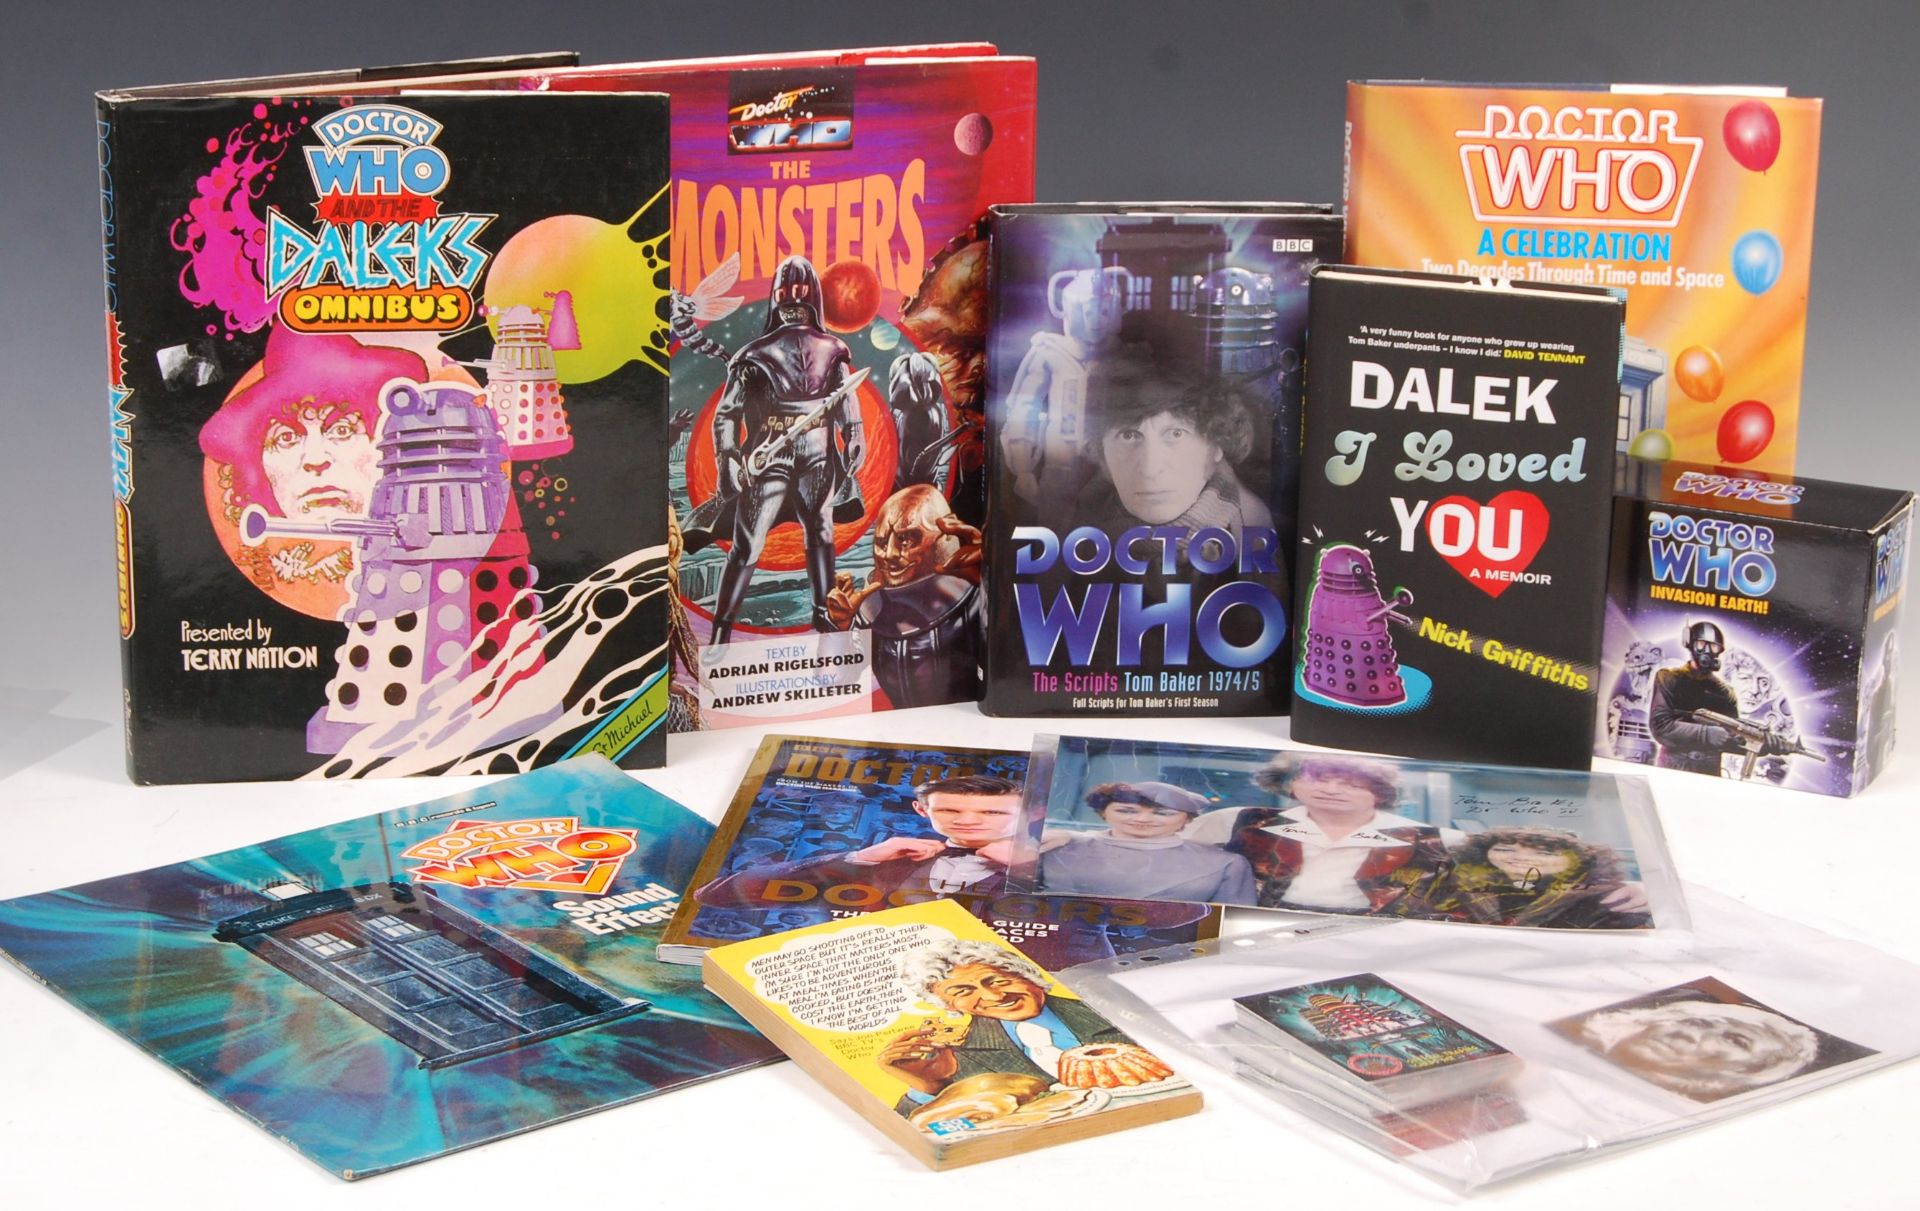 ASSORTED DR WHO RELATED MEMORABILIA, AUTOGRAPHS AND BOOKS